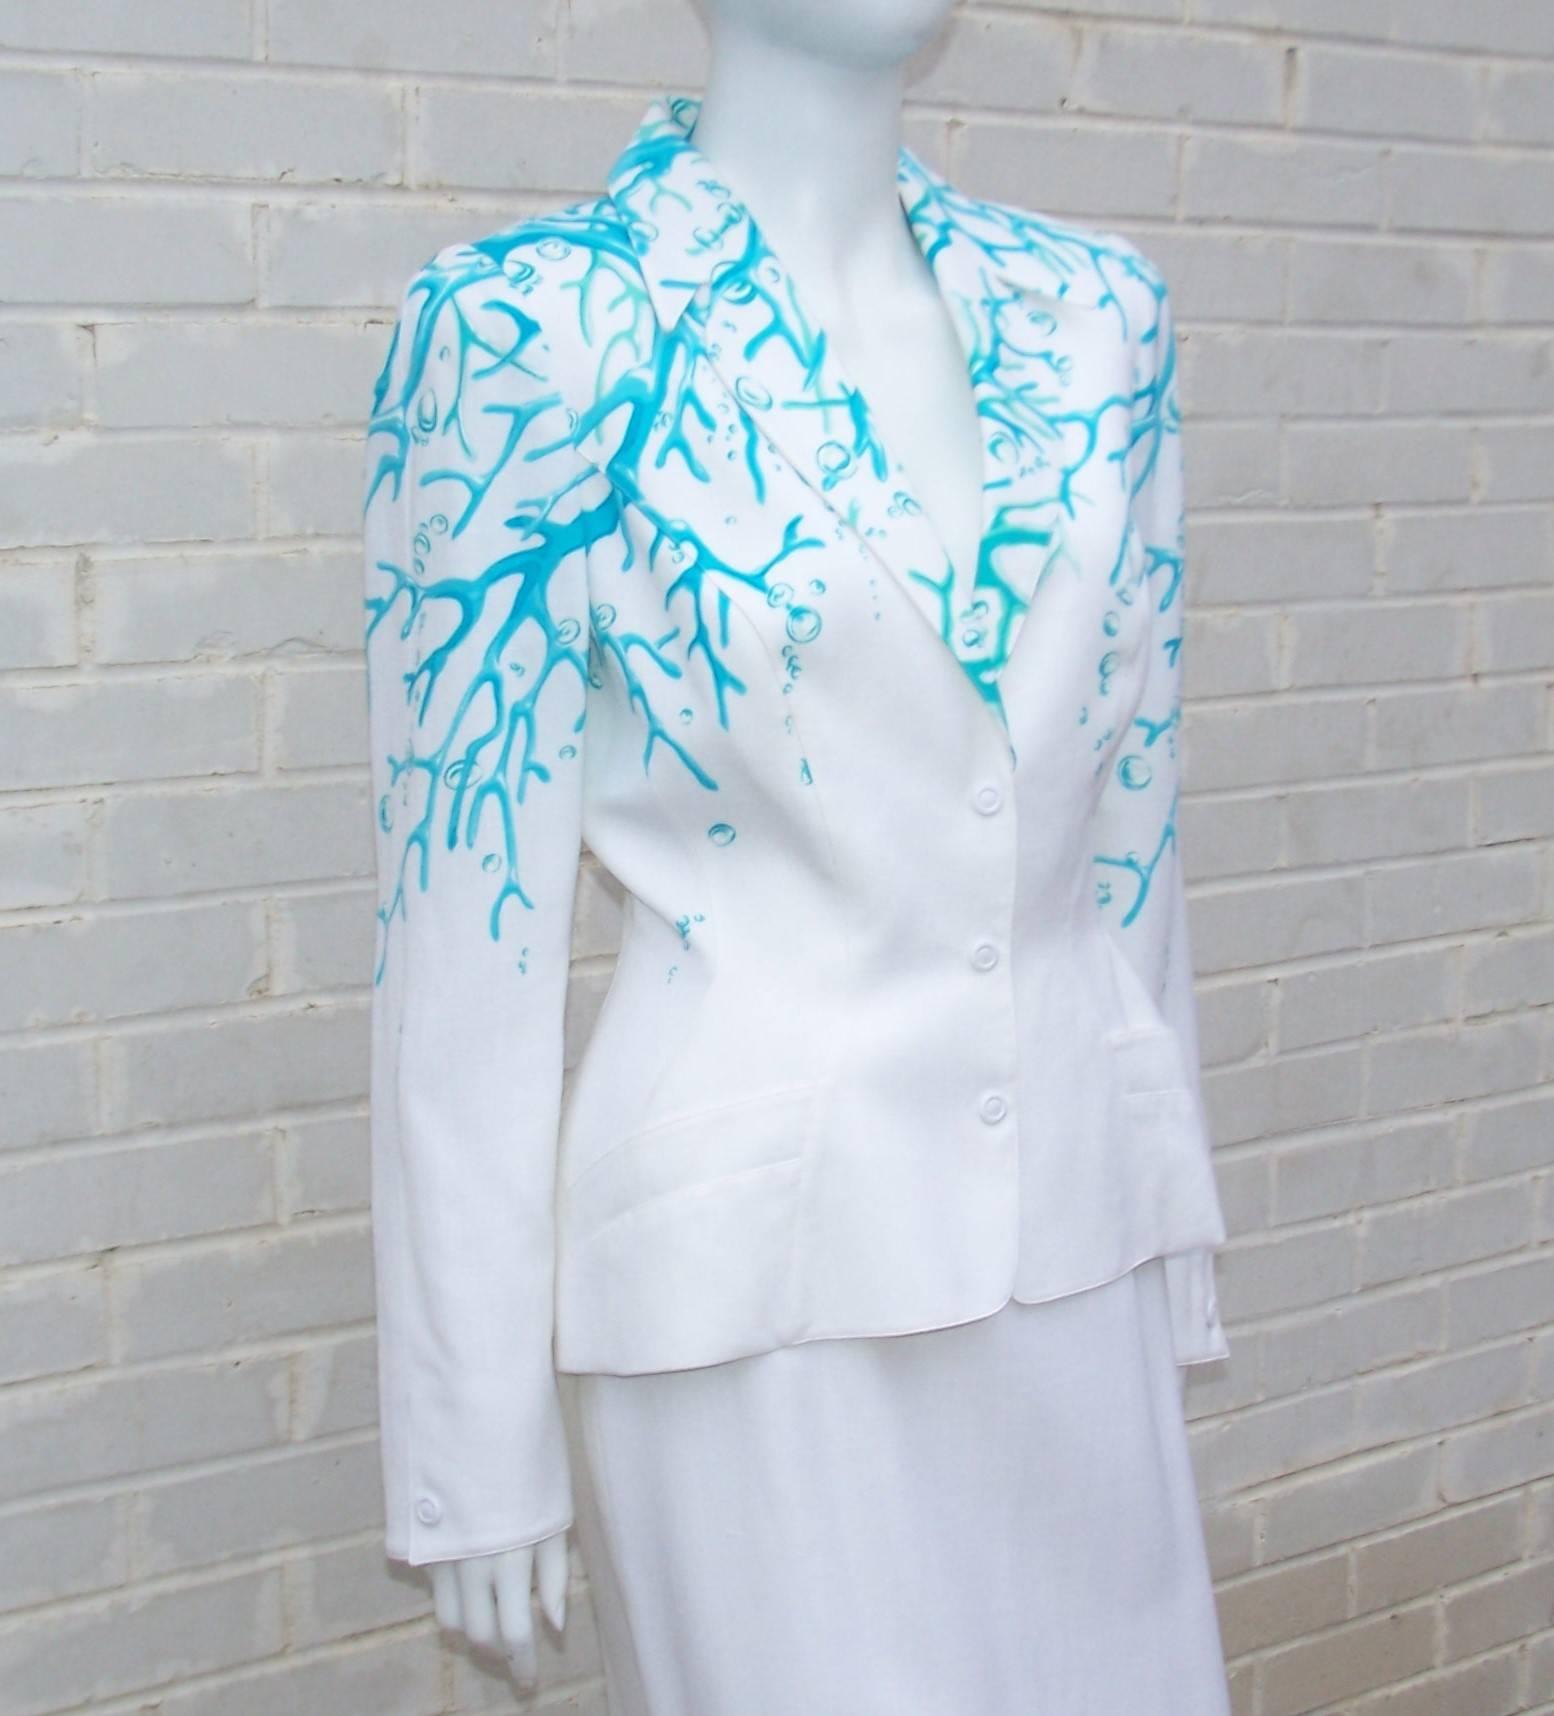 Thierry Mugler creates a tropical vibe with this crisp white linen blend suit decorated with aqua coral motif laced with a hint of sea foam green.  The classic Mugler wasp waist jacket snaps at the front with fabric covered buttons and stylish